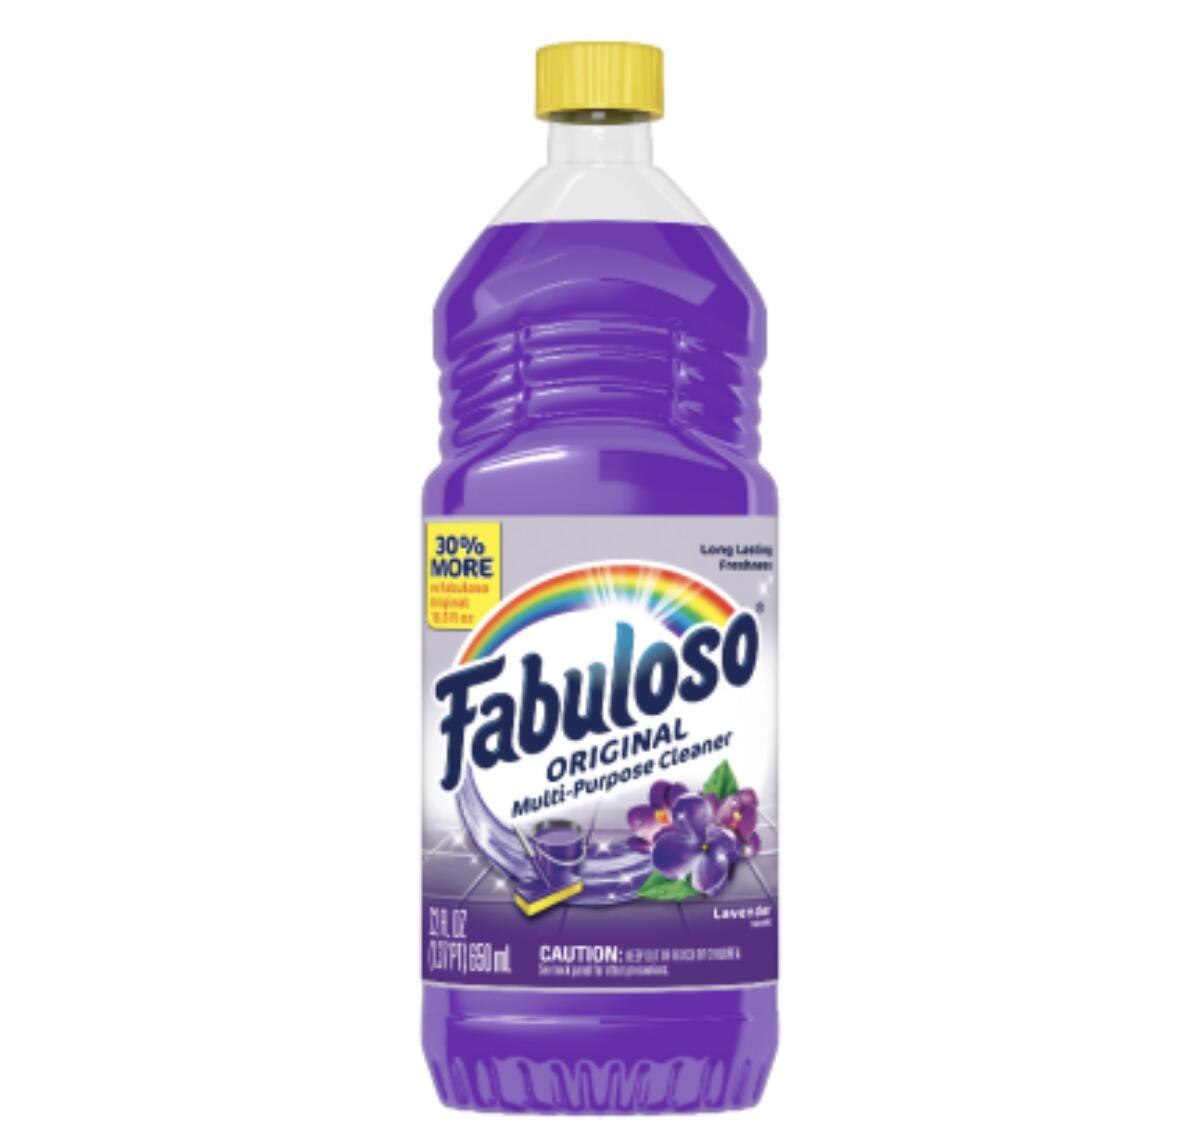 A bottle of the Fabuloso Multi-Purpose Cleaner